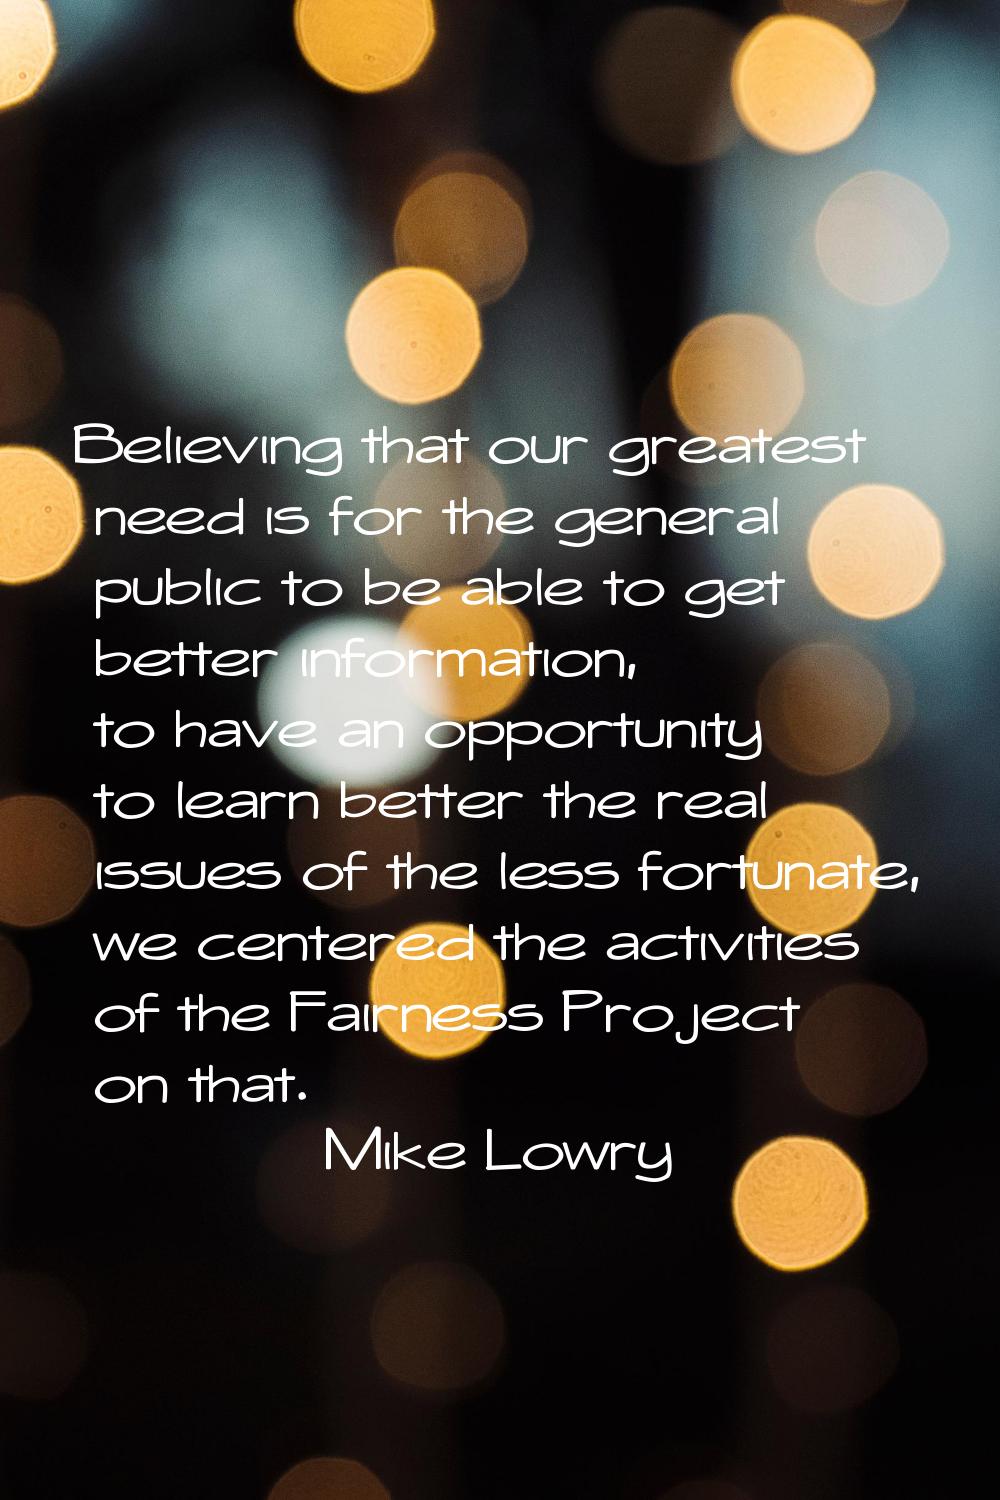 Believing that our greatest need is for the general public to be able to get better information, to